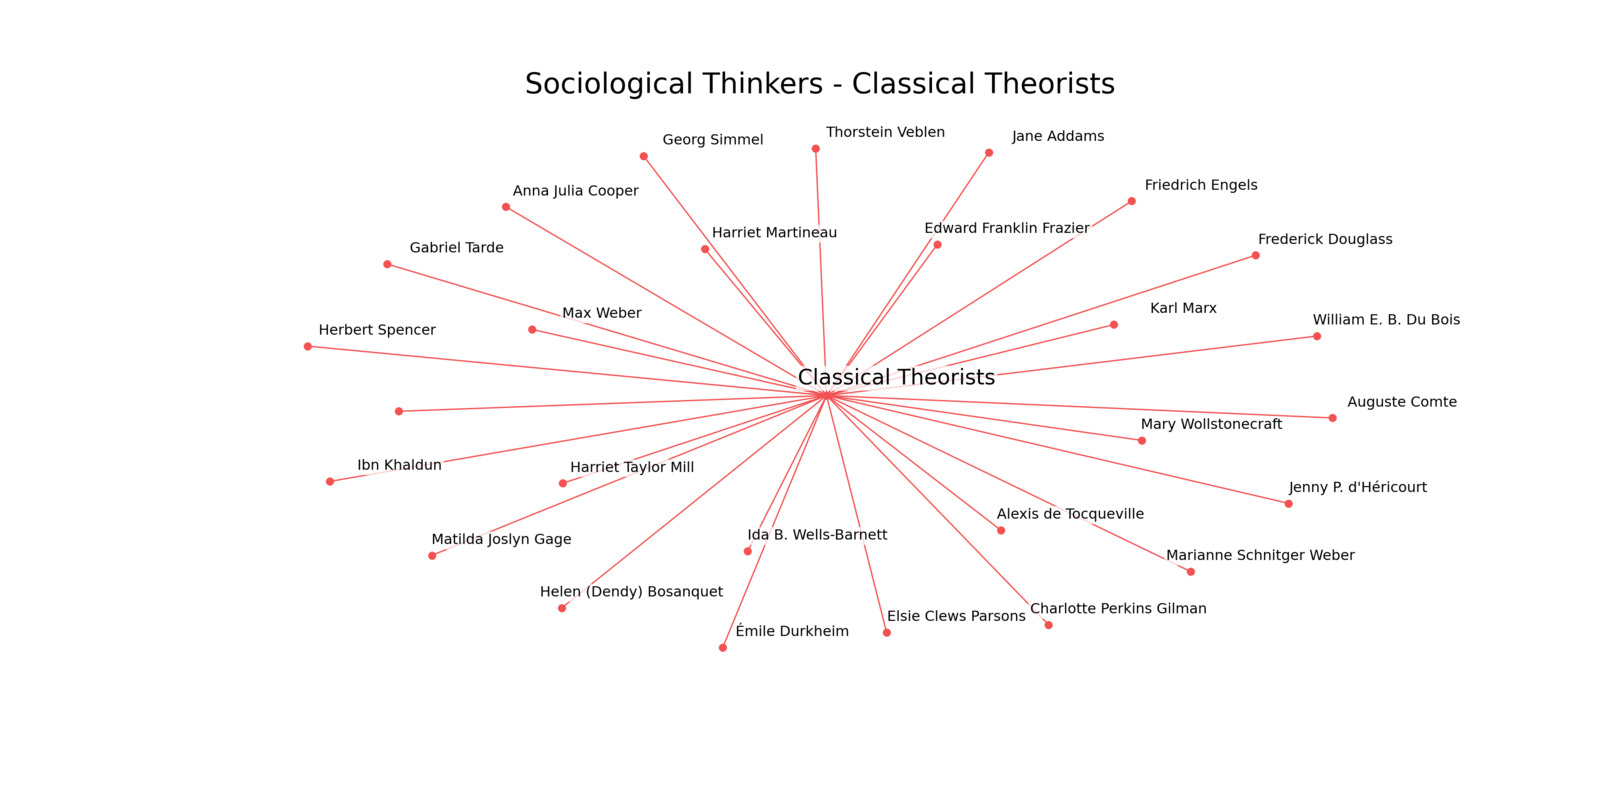 Classical Theorists Cluster of Sociological Thinkers